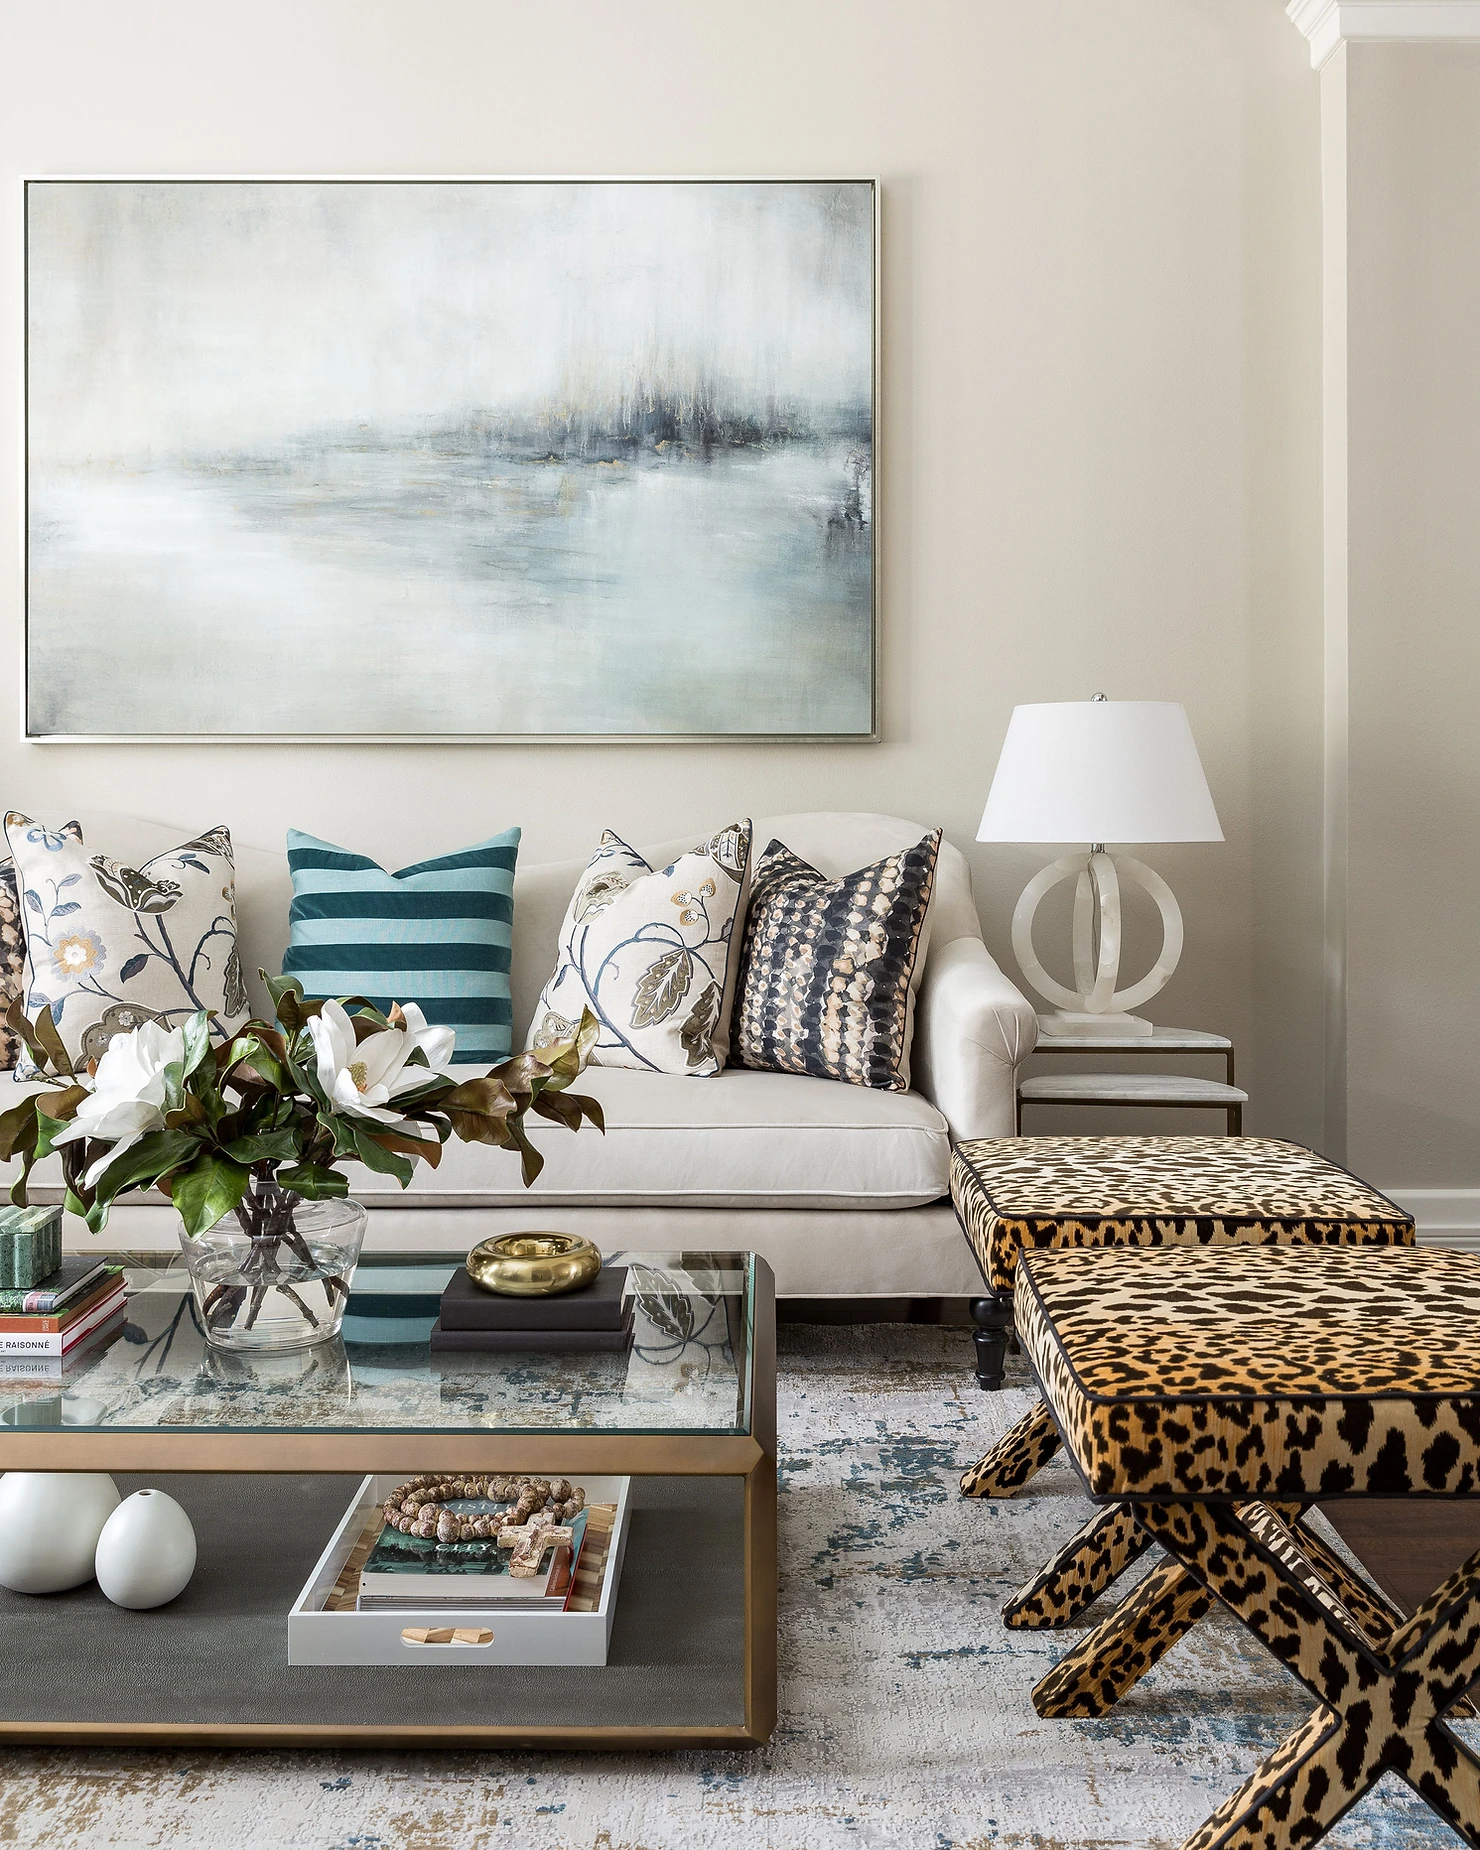 living room with bold patterned decor and greige walls